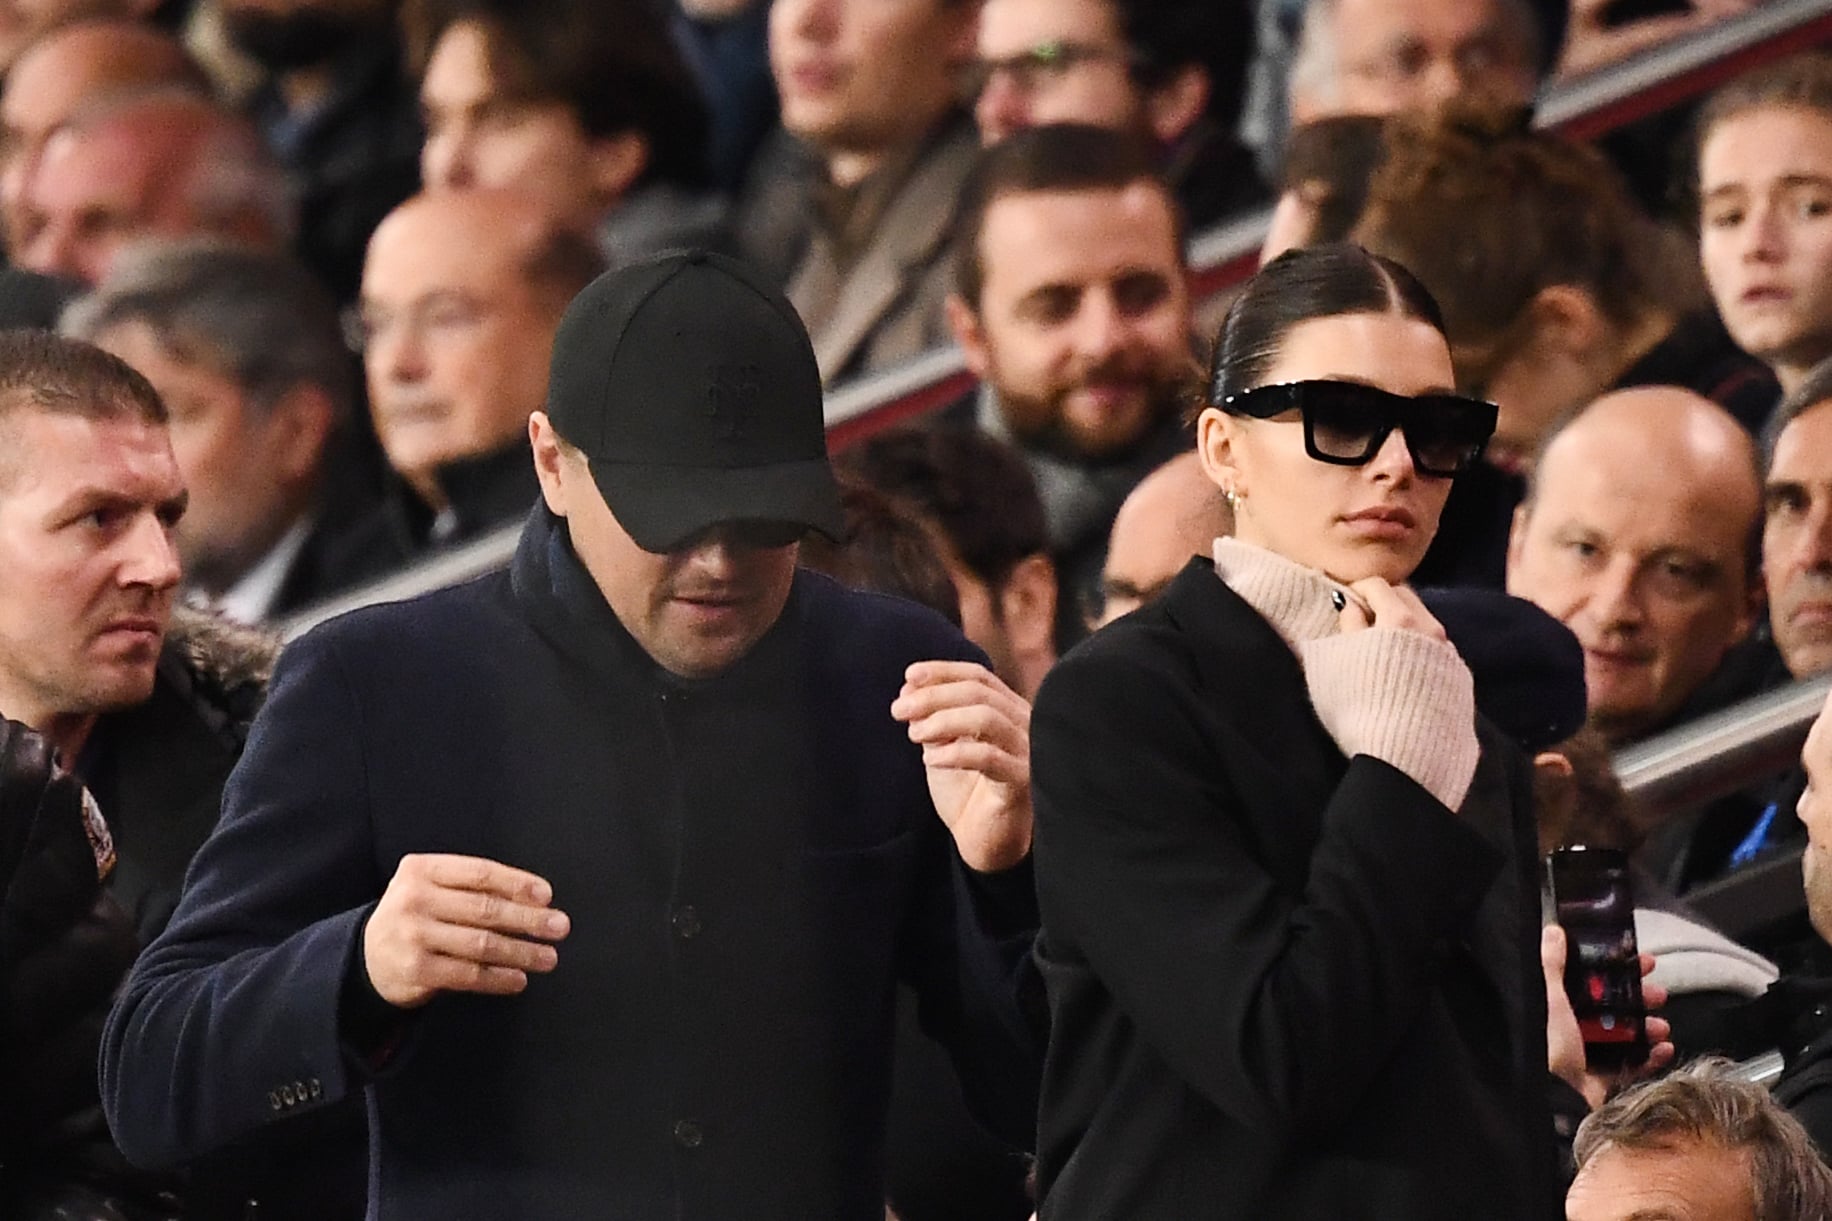 US actor Leonardo Di Caprio (C) and his partner Argentinian and US model Camilla Morrone (R) attend the UEFA Champions League Group C football match between Paris Saint-Germain (PSG) and Liverpool FC at the Parc des Princes stadium, in Paris, on November 28, 2018. (Photo by FRANCK FIFE / AFP)        (Photo credit should read FRANCK FIFE/AFP via Getty Images)